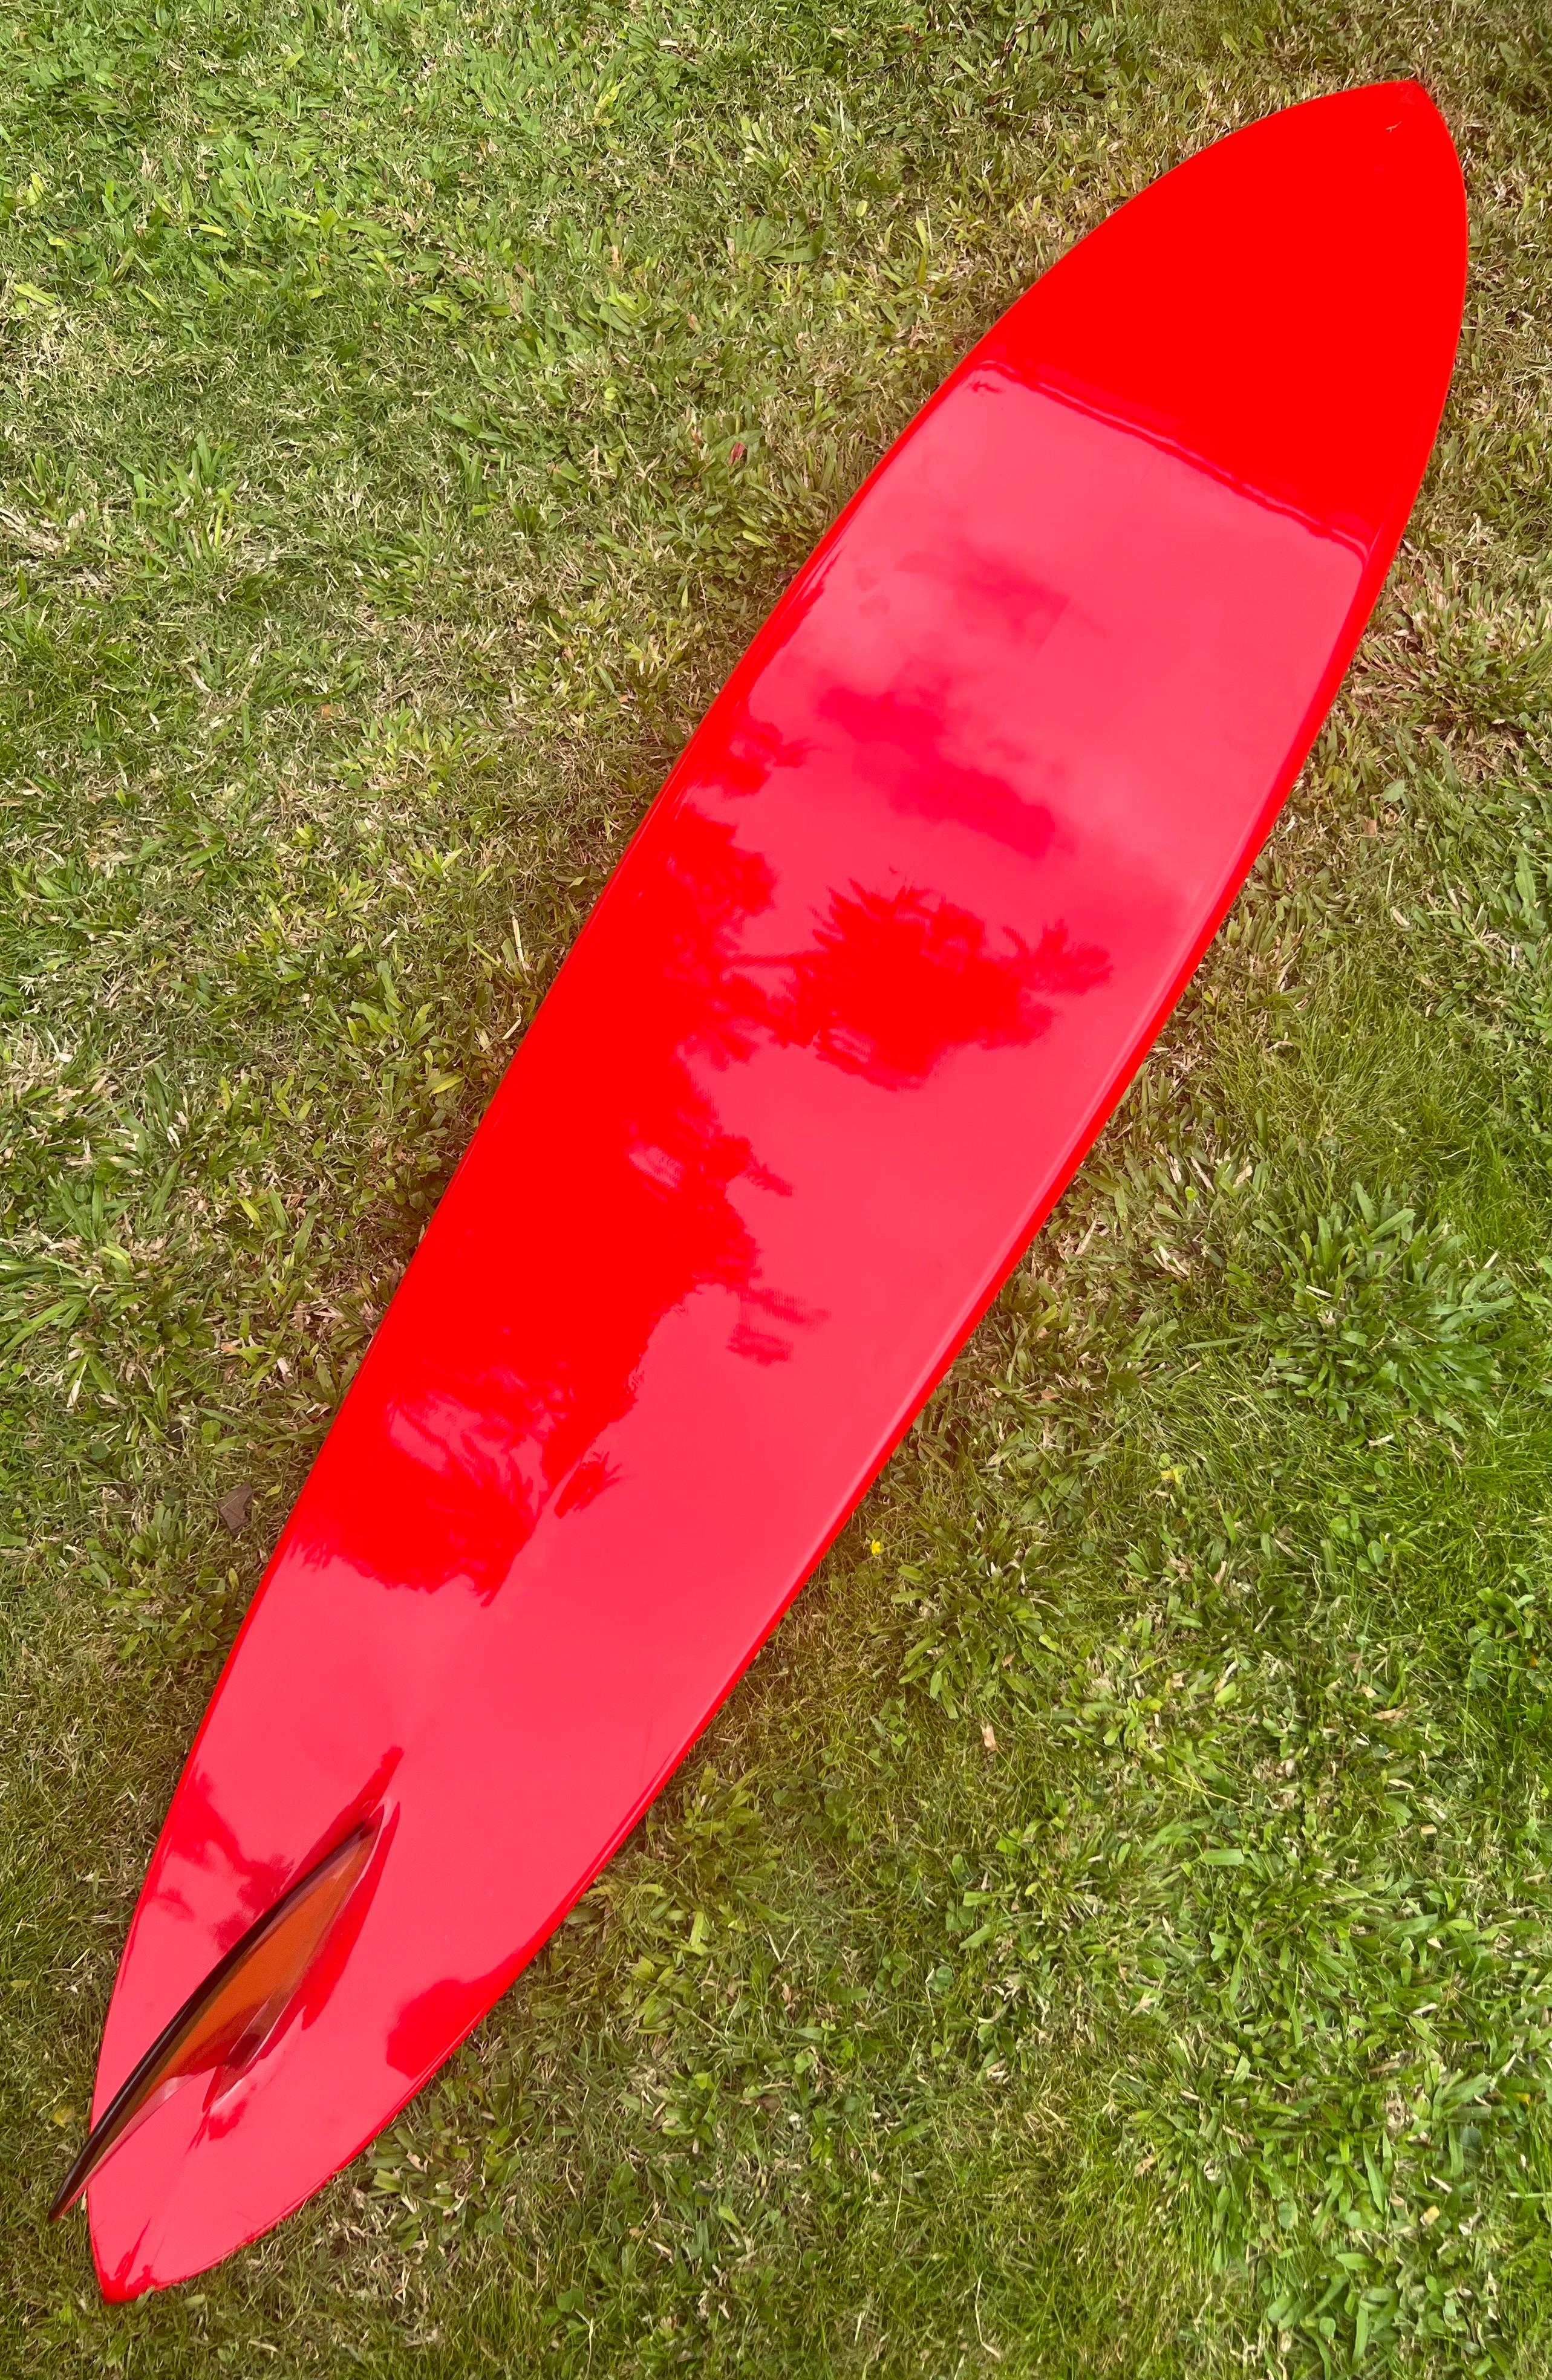 1968 Replica Lahaina Clinton Blears model surfboard by Dick Brewer In Good Condition For Sale In Haleiwa, HI